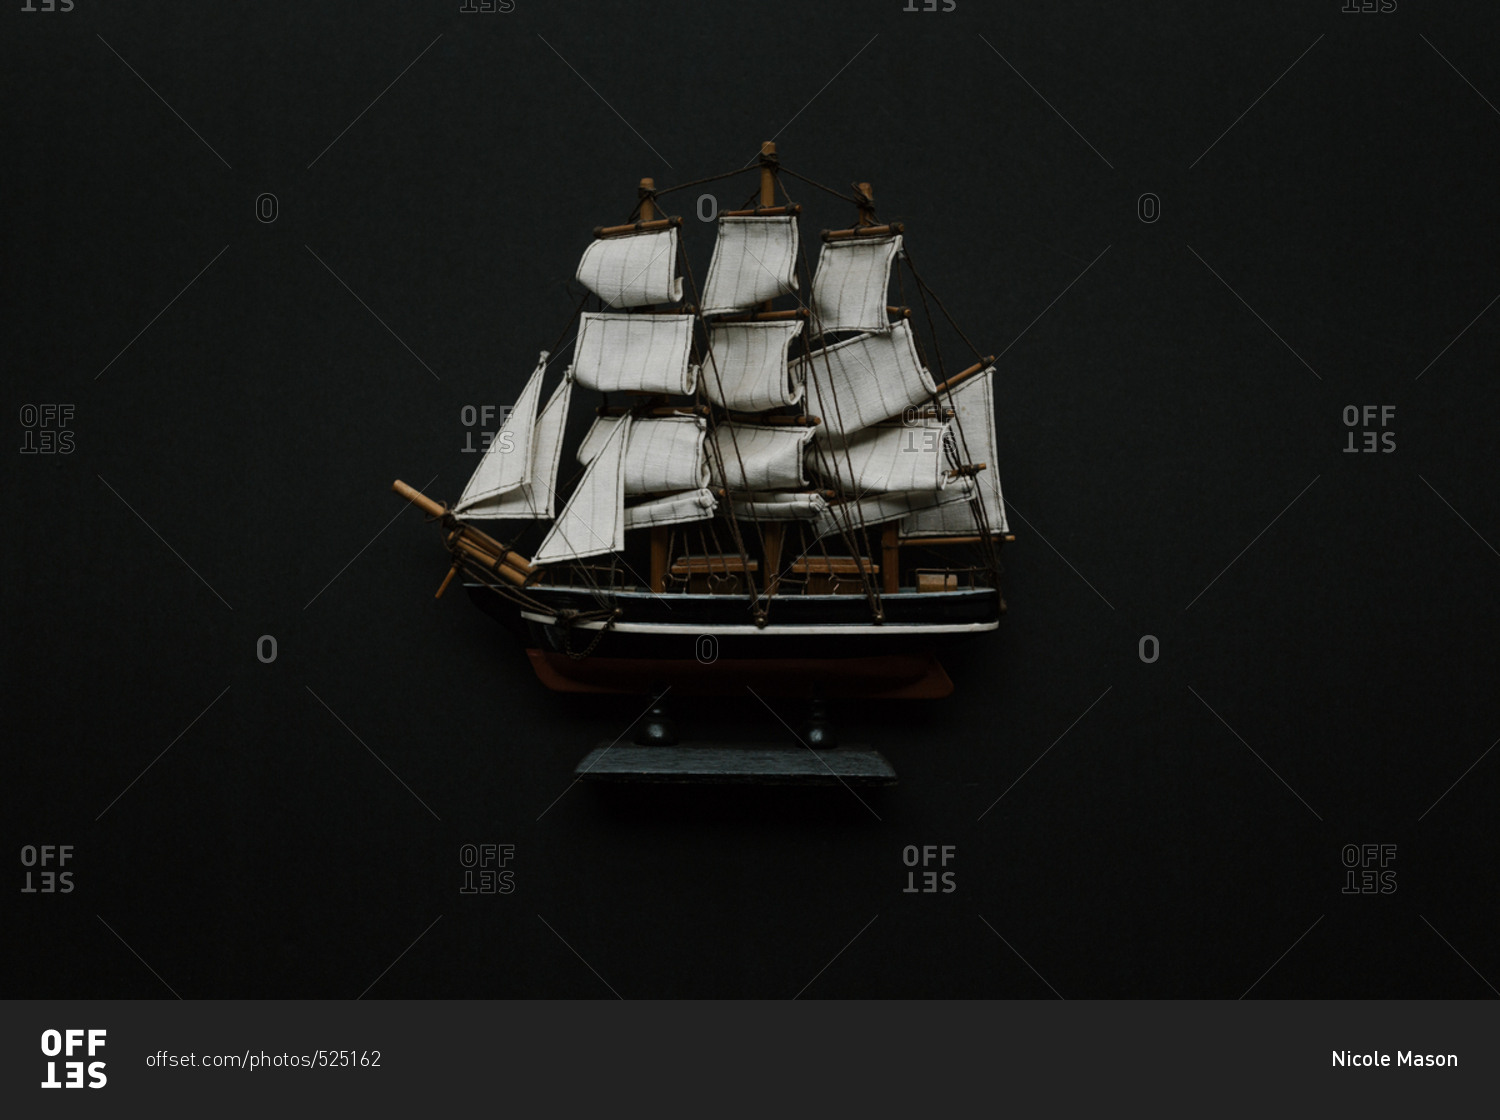 Old-fashioned model ship with sails